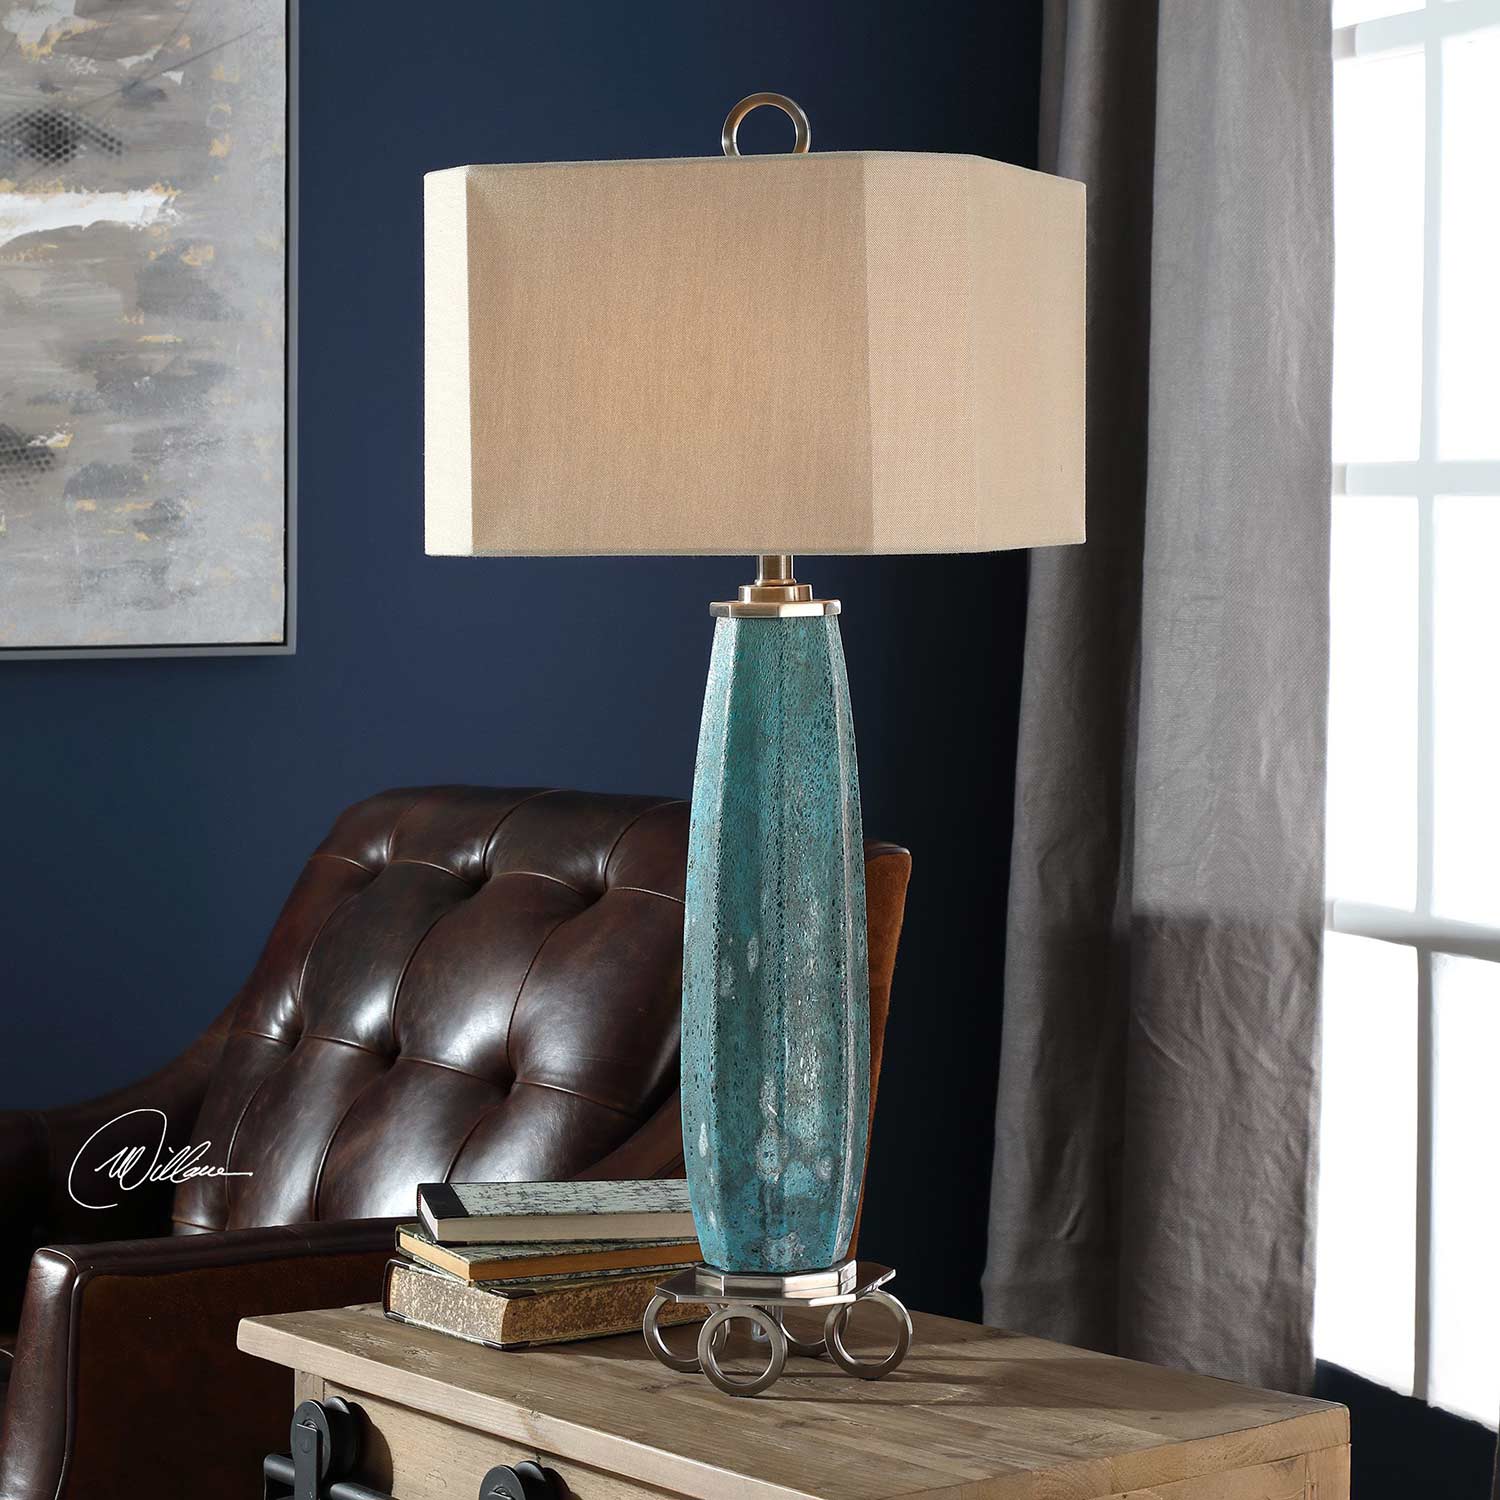 Uttermost Cabella Table Lamp - Aged Blue